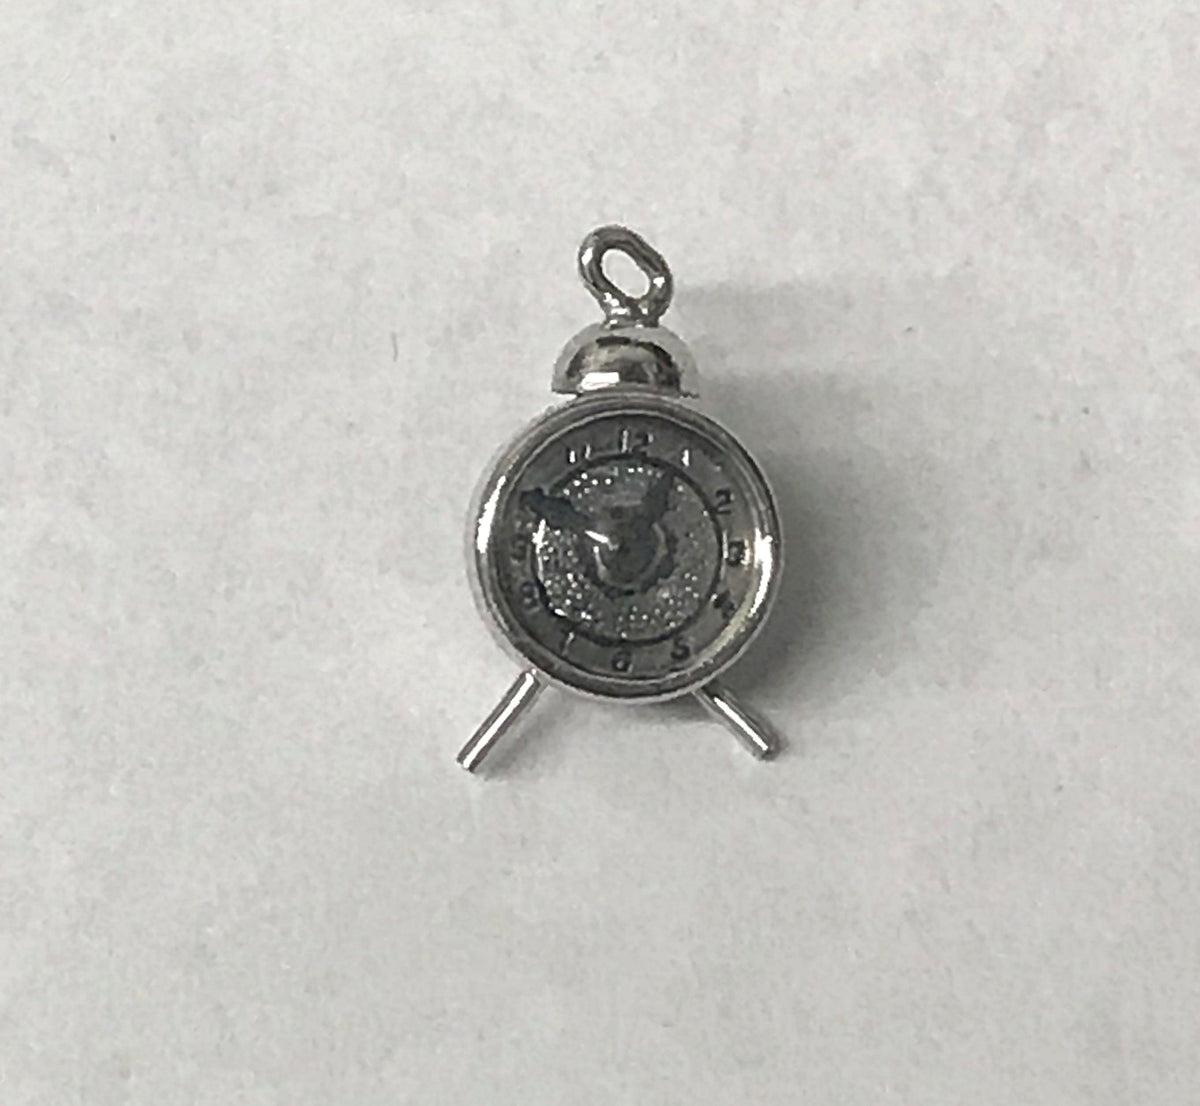 Vintage Wells Alarm Clock Sterling Silver Charm - Hers and His Treasures